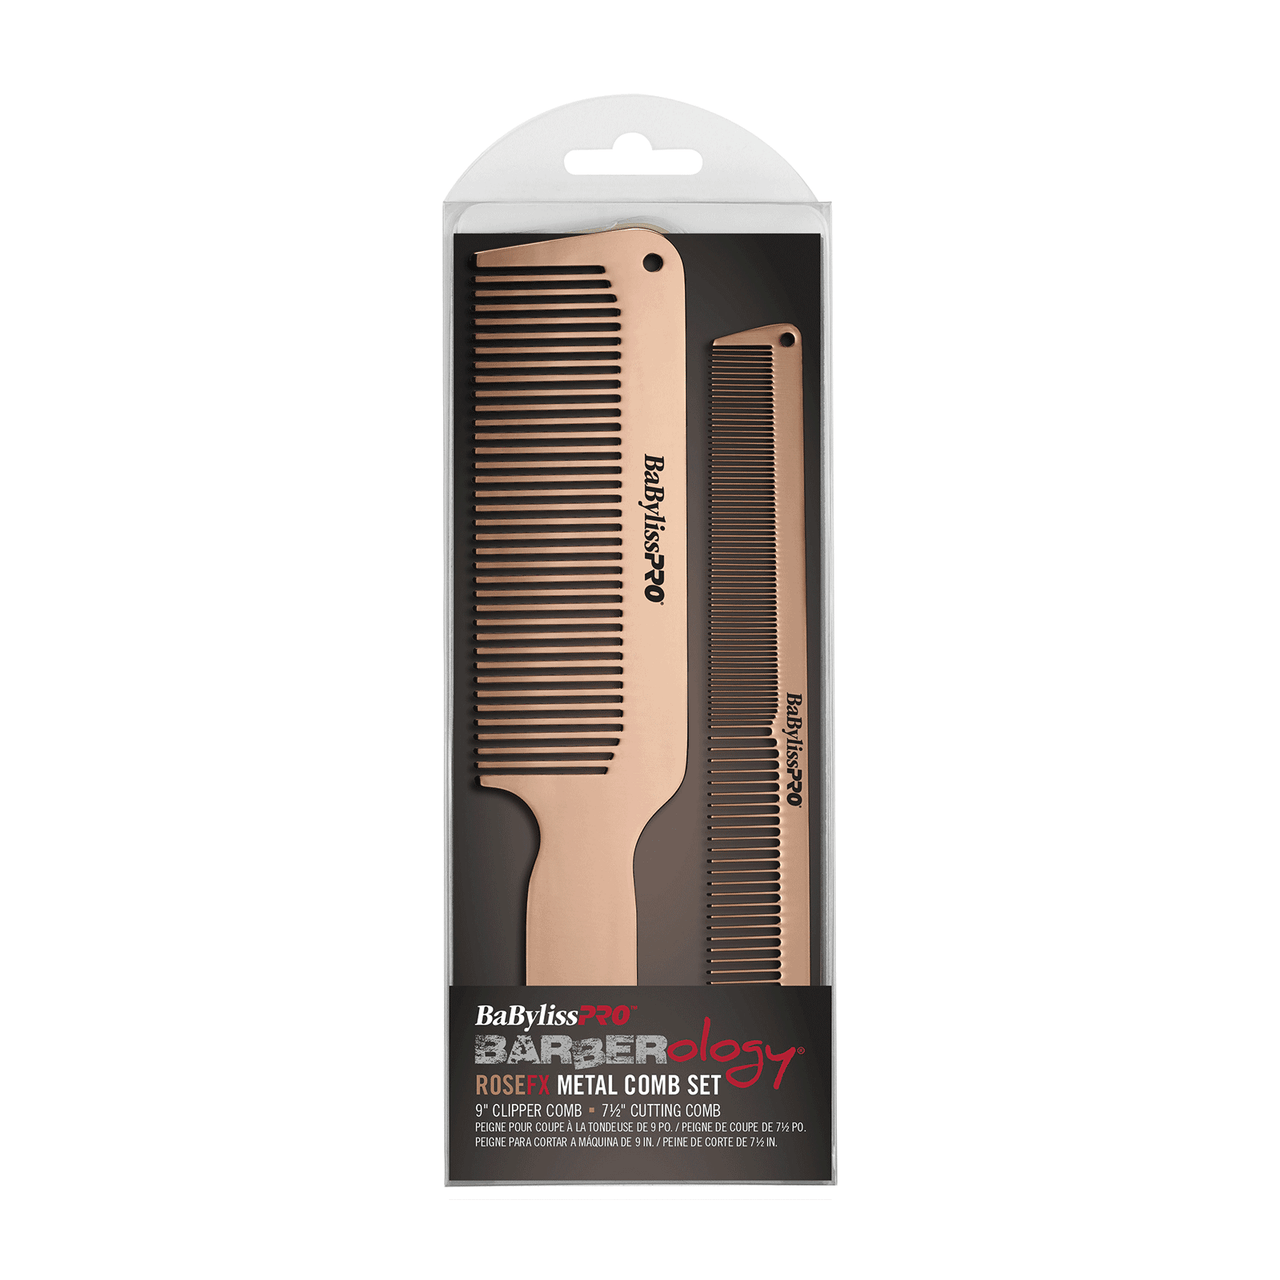 Dannyco Electrical RoseFX Metal Comb 2-Pack 1 Each